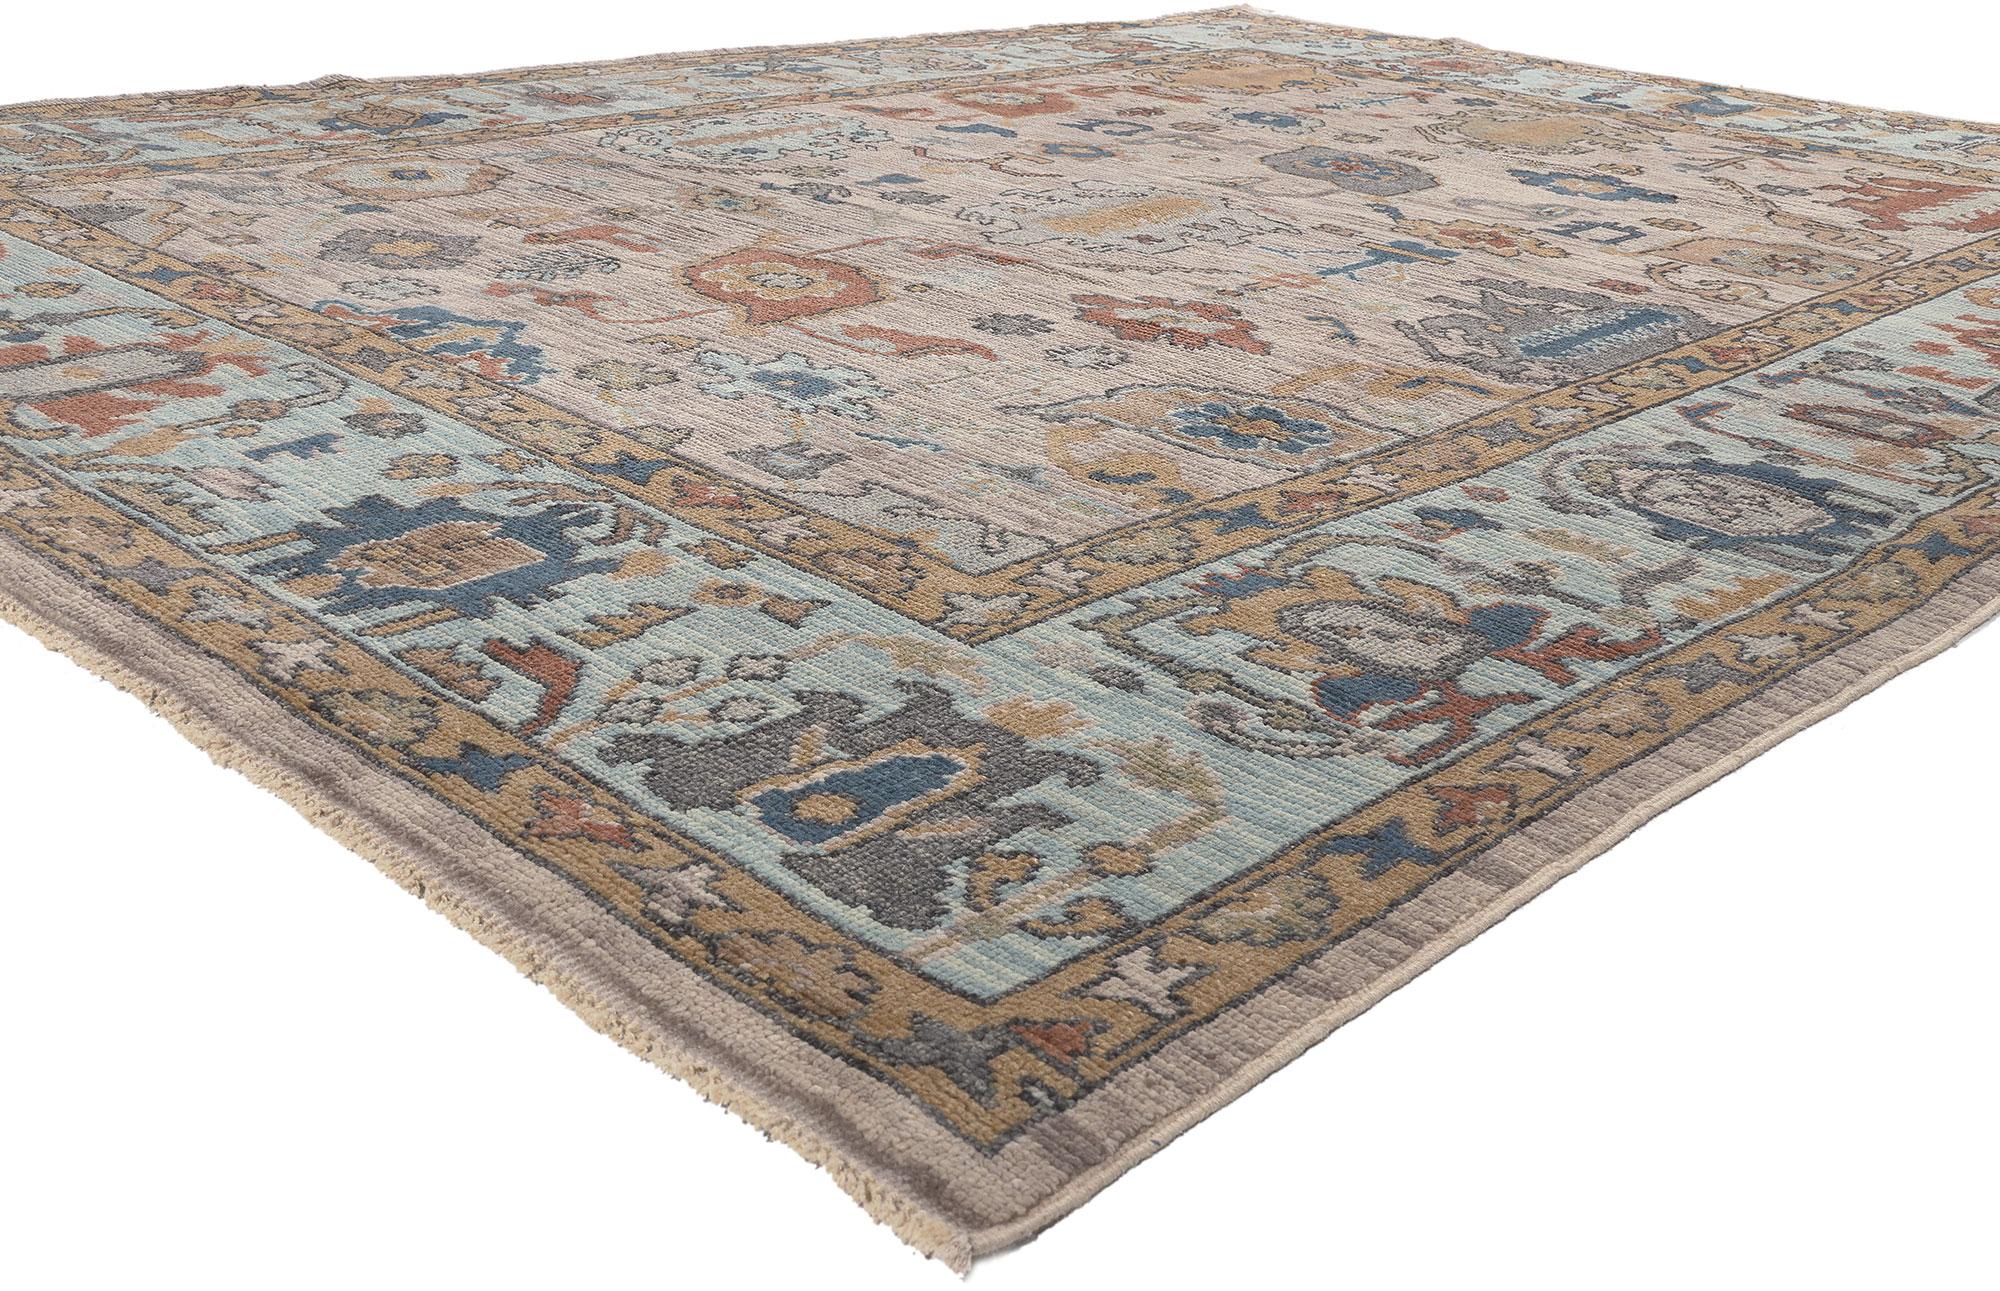 81004 Modern Oushak Rug with Earth-Tone Colors, 08'11 x 12'00. Emanating enduring Georgian elegance through meticulous craftsmanship and sumptuous texture, this hand-knotted wool Oushak rug seamlessly channels the sophistication of the era while